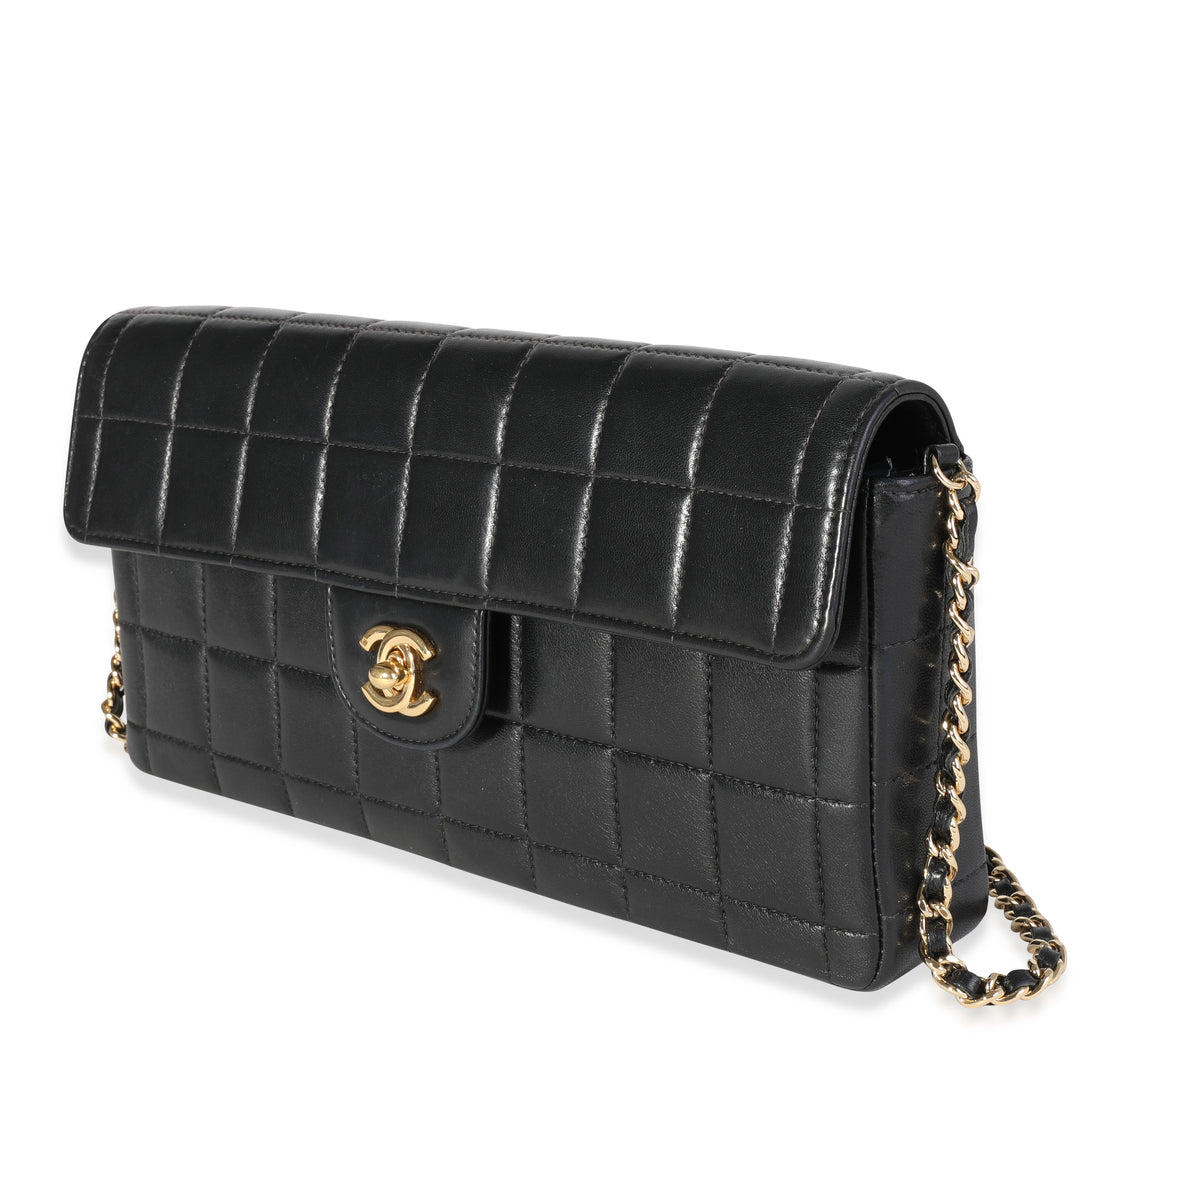 Chanel Black Lambskin Chocolate Bar Quilted East West Flap Bag, myGemma